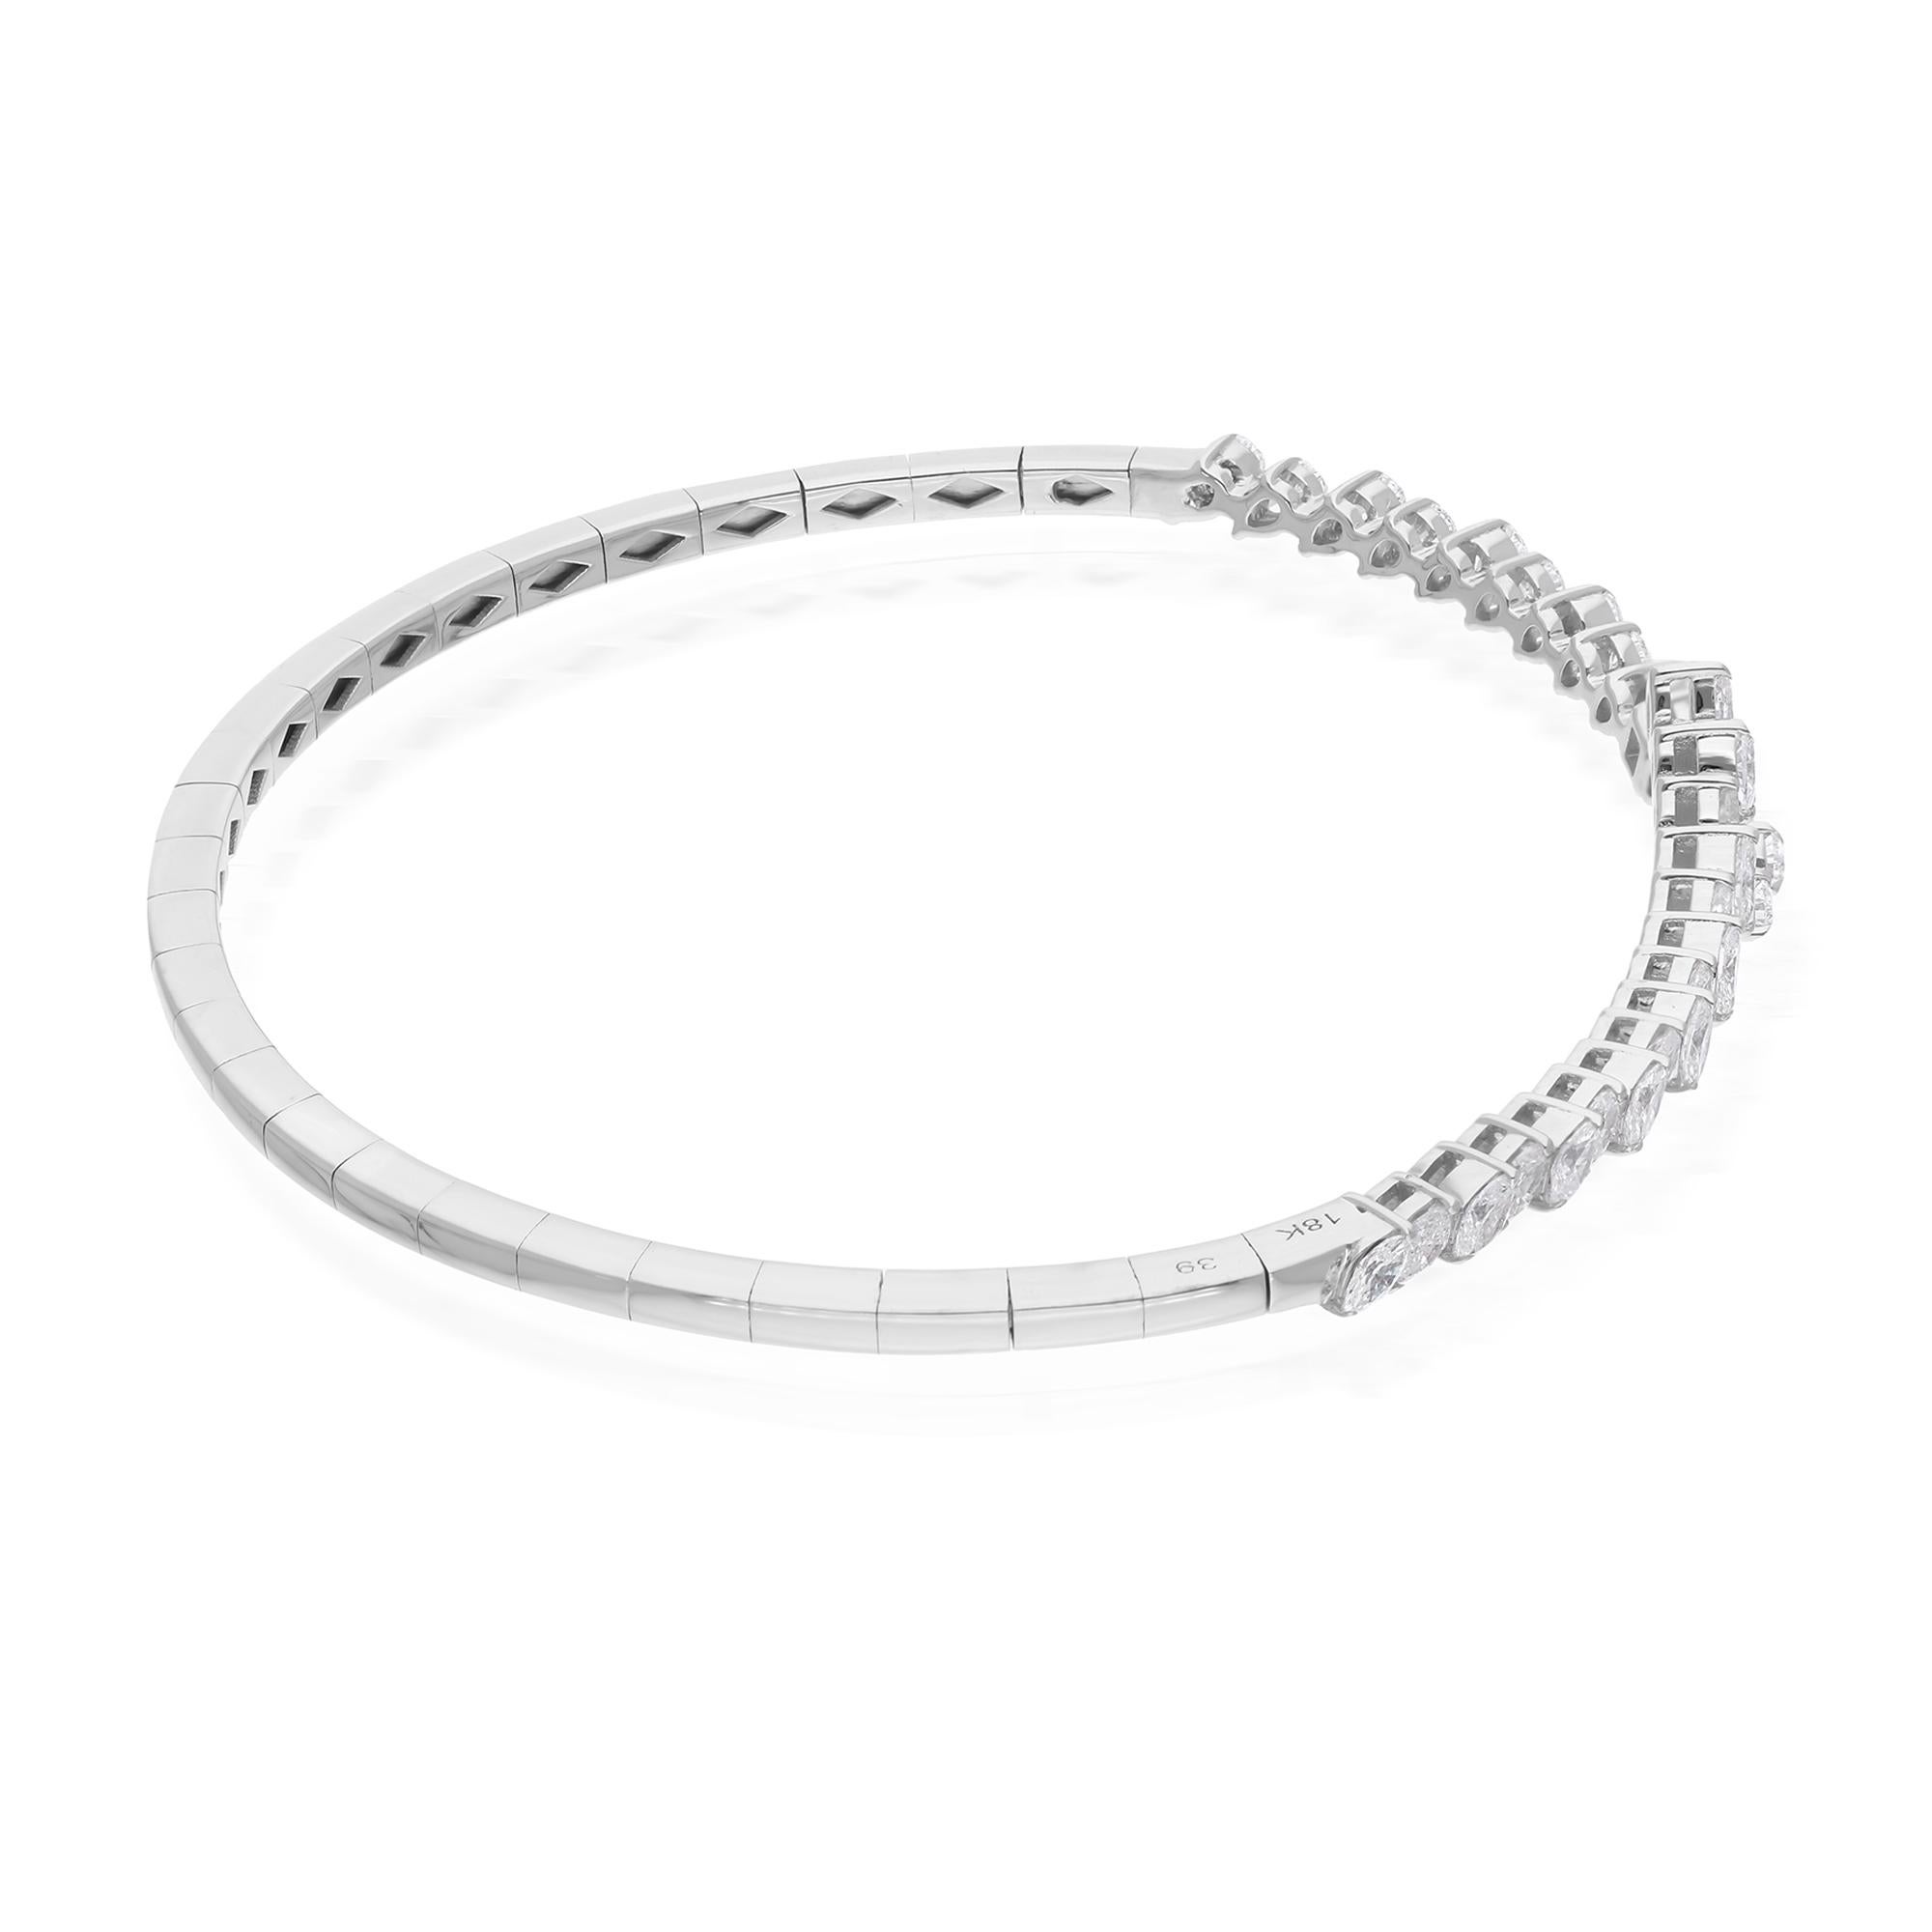 This exquisite bracelet exudes sophistication and luxury, featuring a sleek cuff design that effortlessly wraps around the wrist with grace and poise. The lustrous 18 Karat White Gold setting provides the perfect backdrop for the dazzling array of